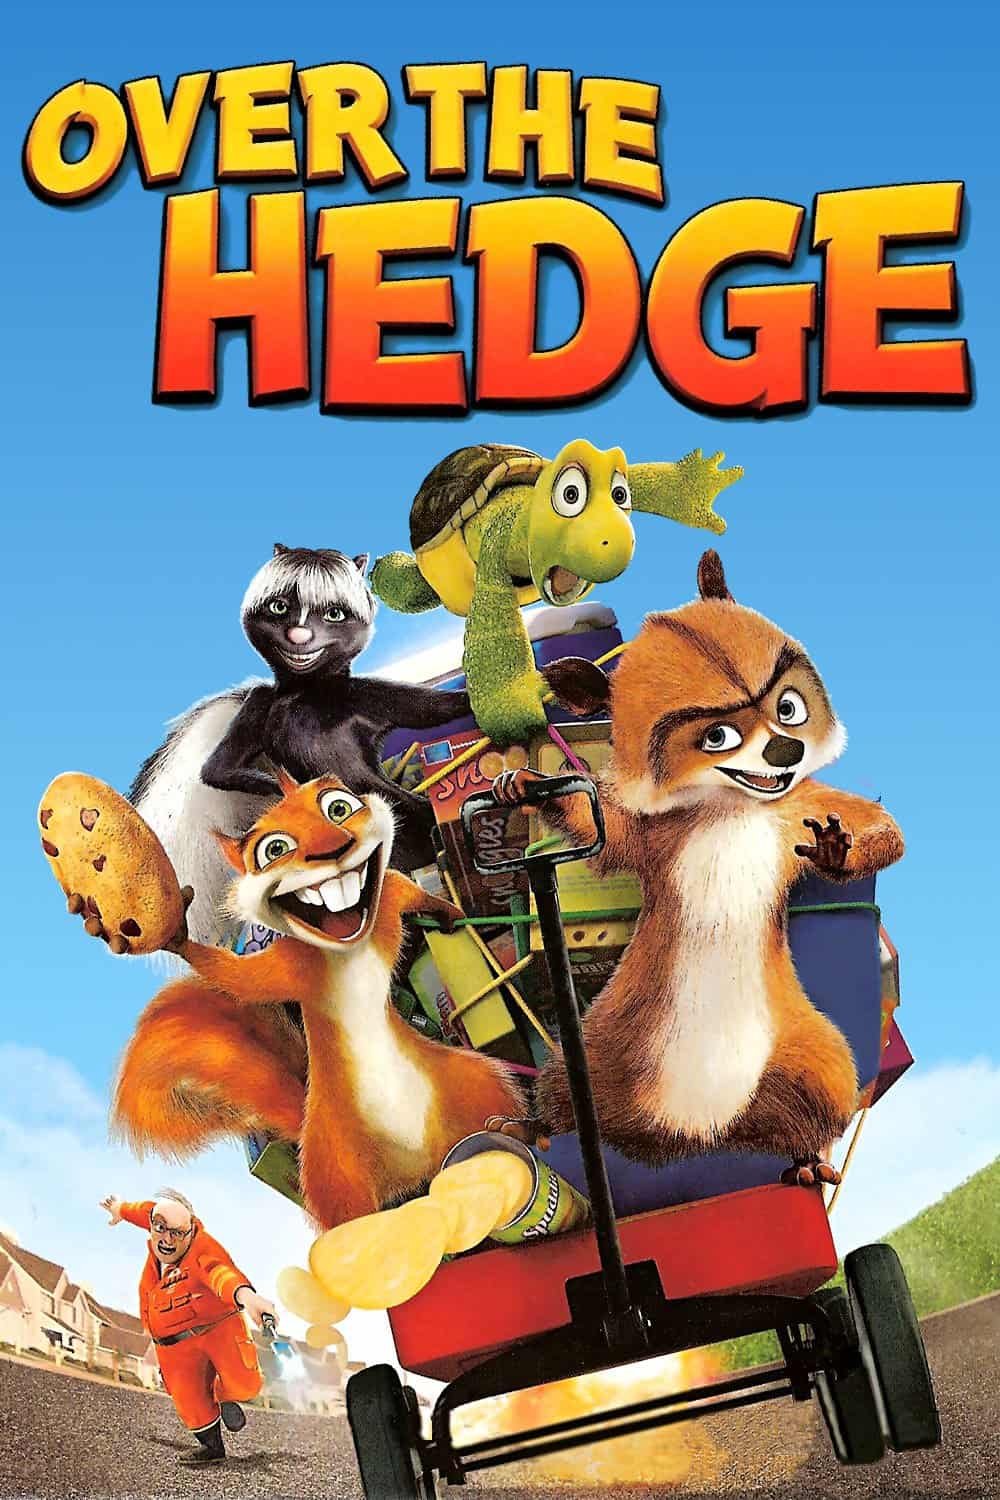 Over the Hedge, 2006 